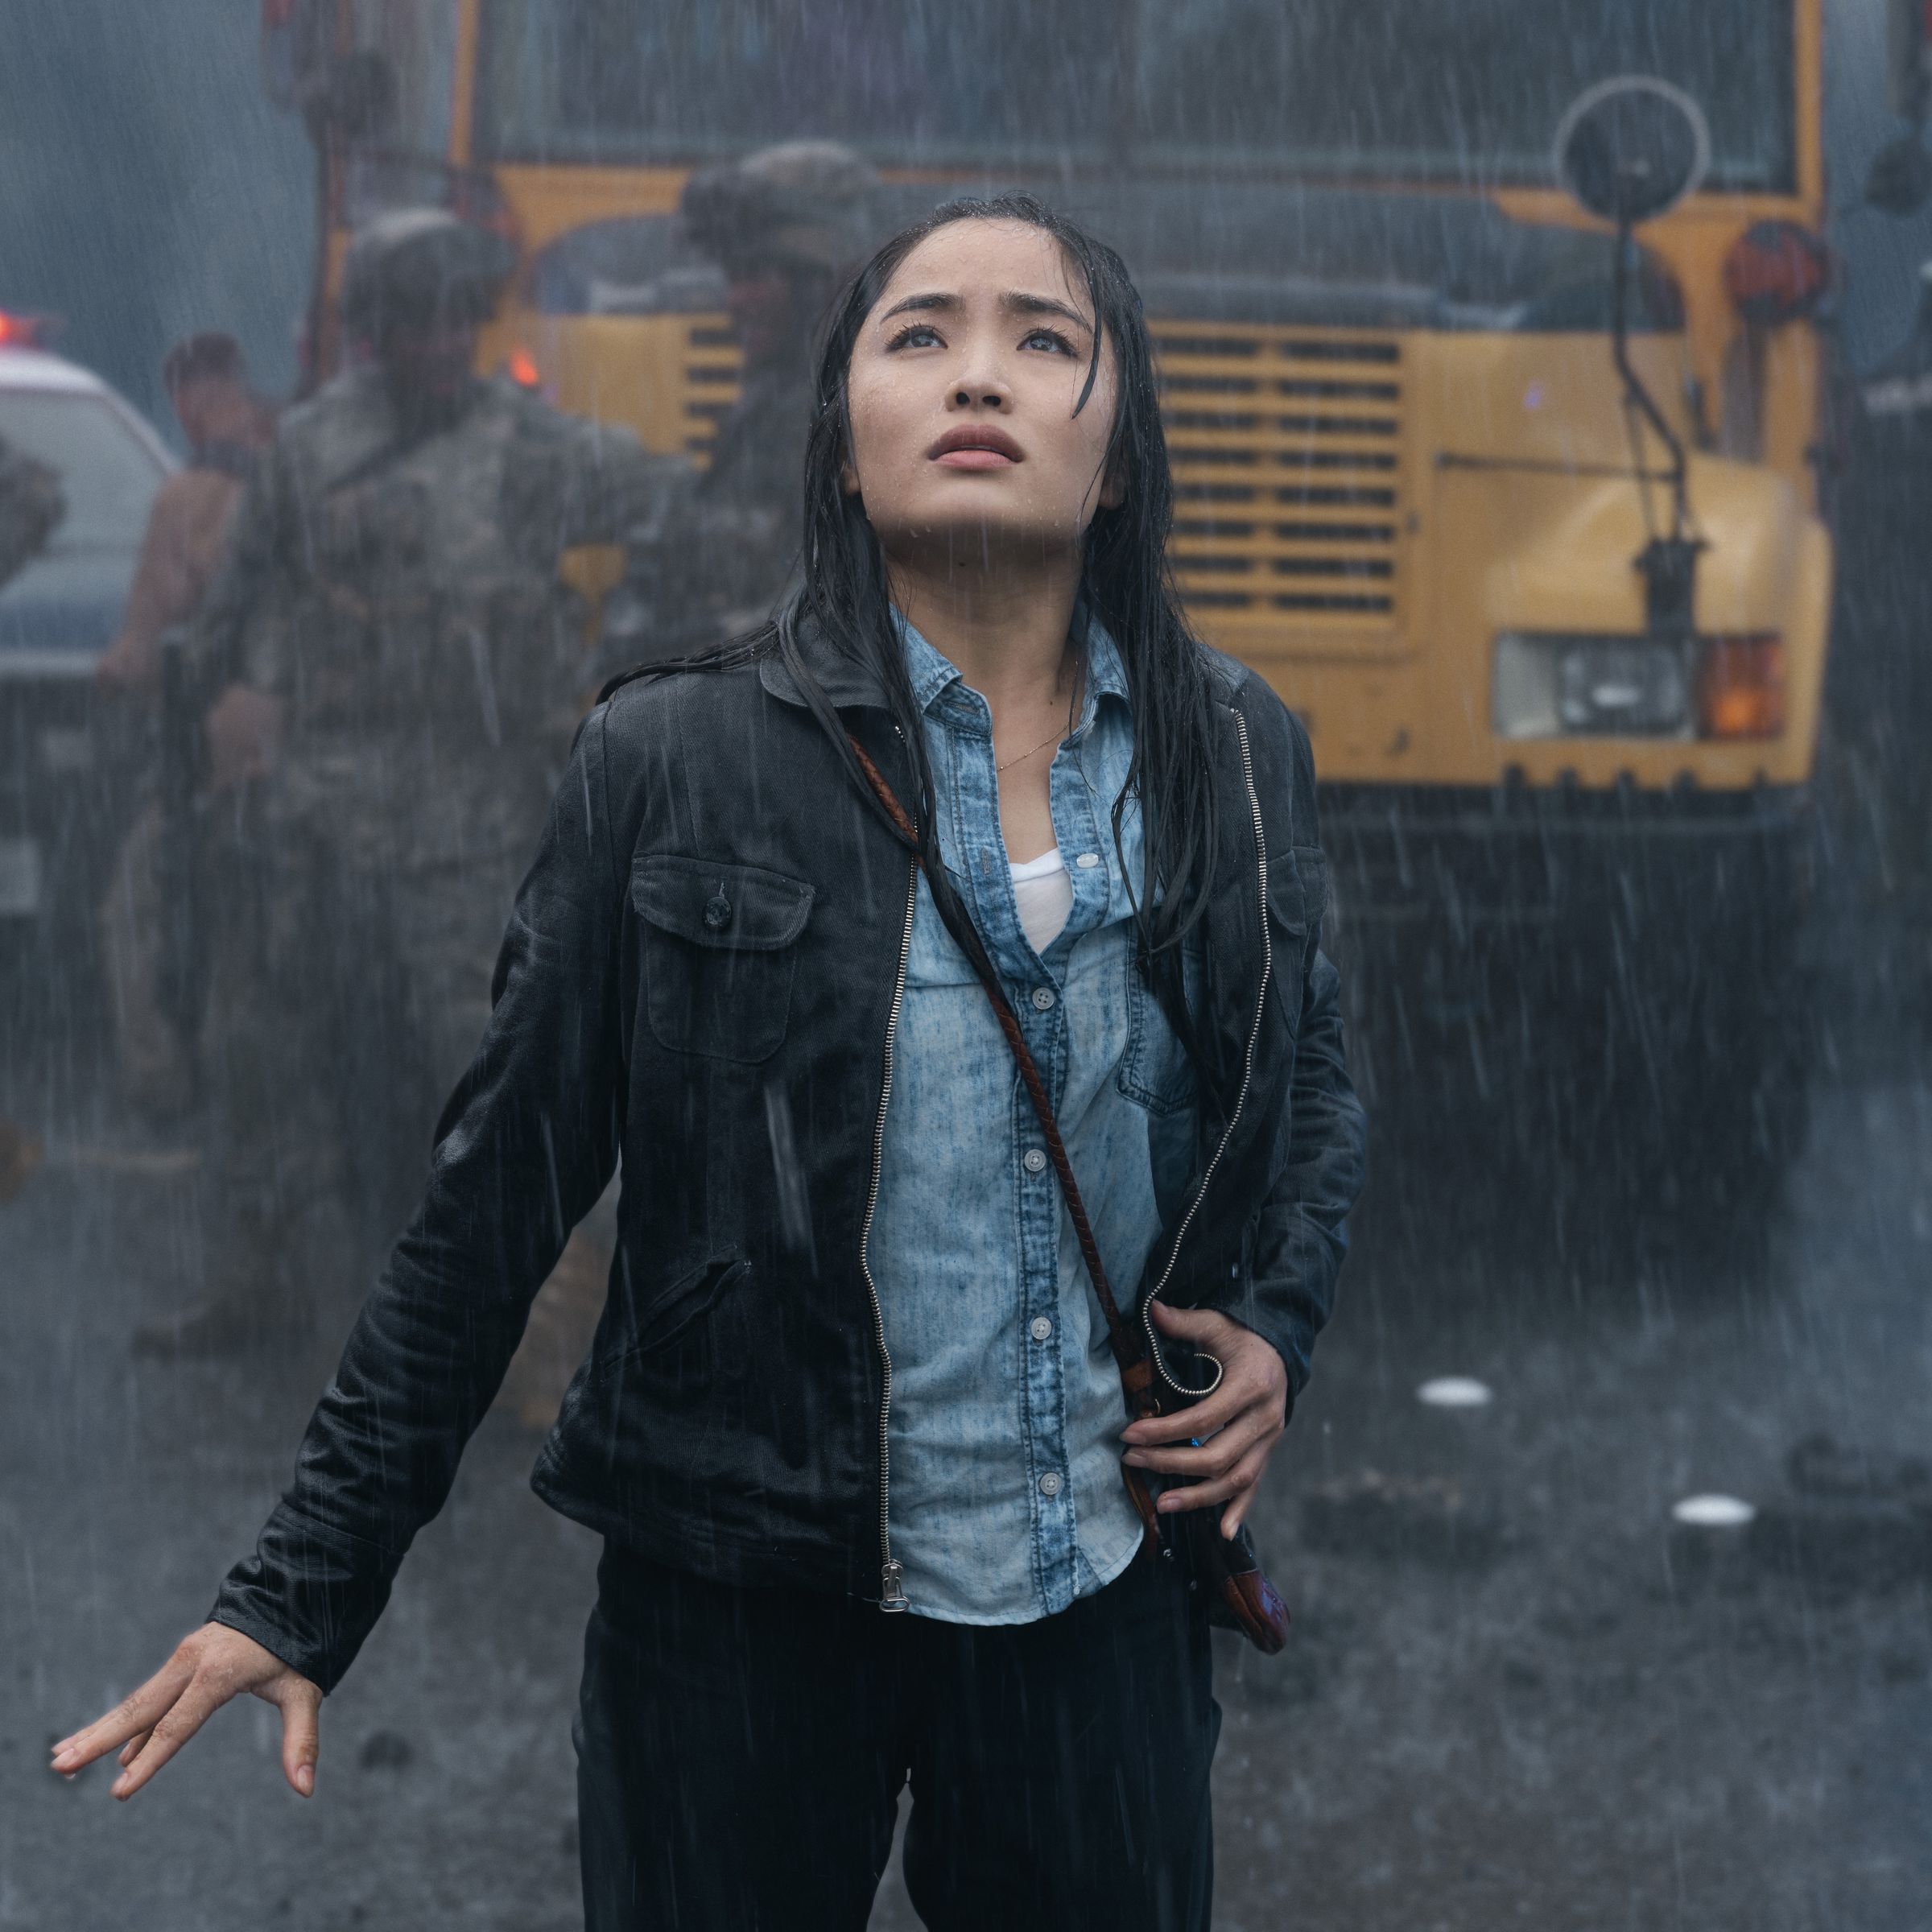 A woman in a blue shirt, black pants, and a black jacket standing in the rain in front of a school bus as she looks up in dismay at something towering above her.